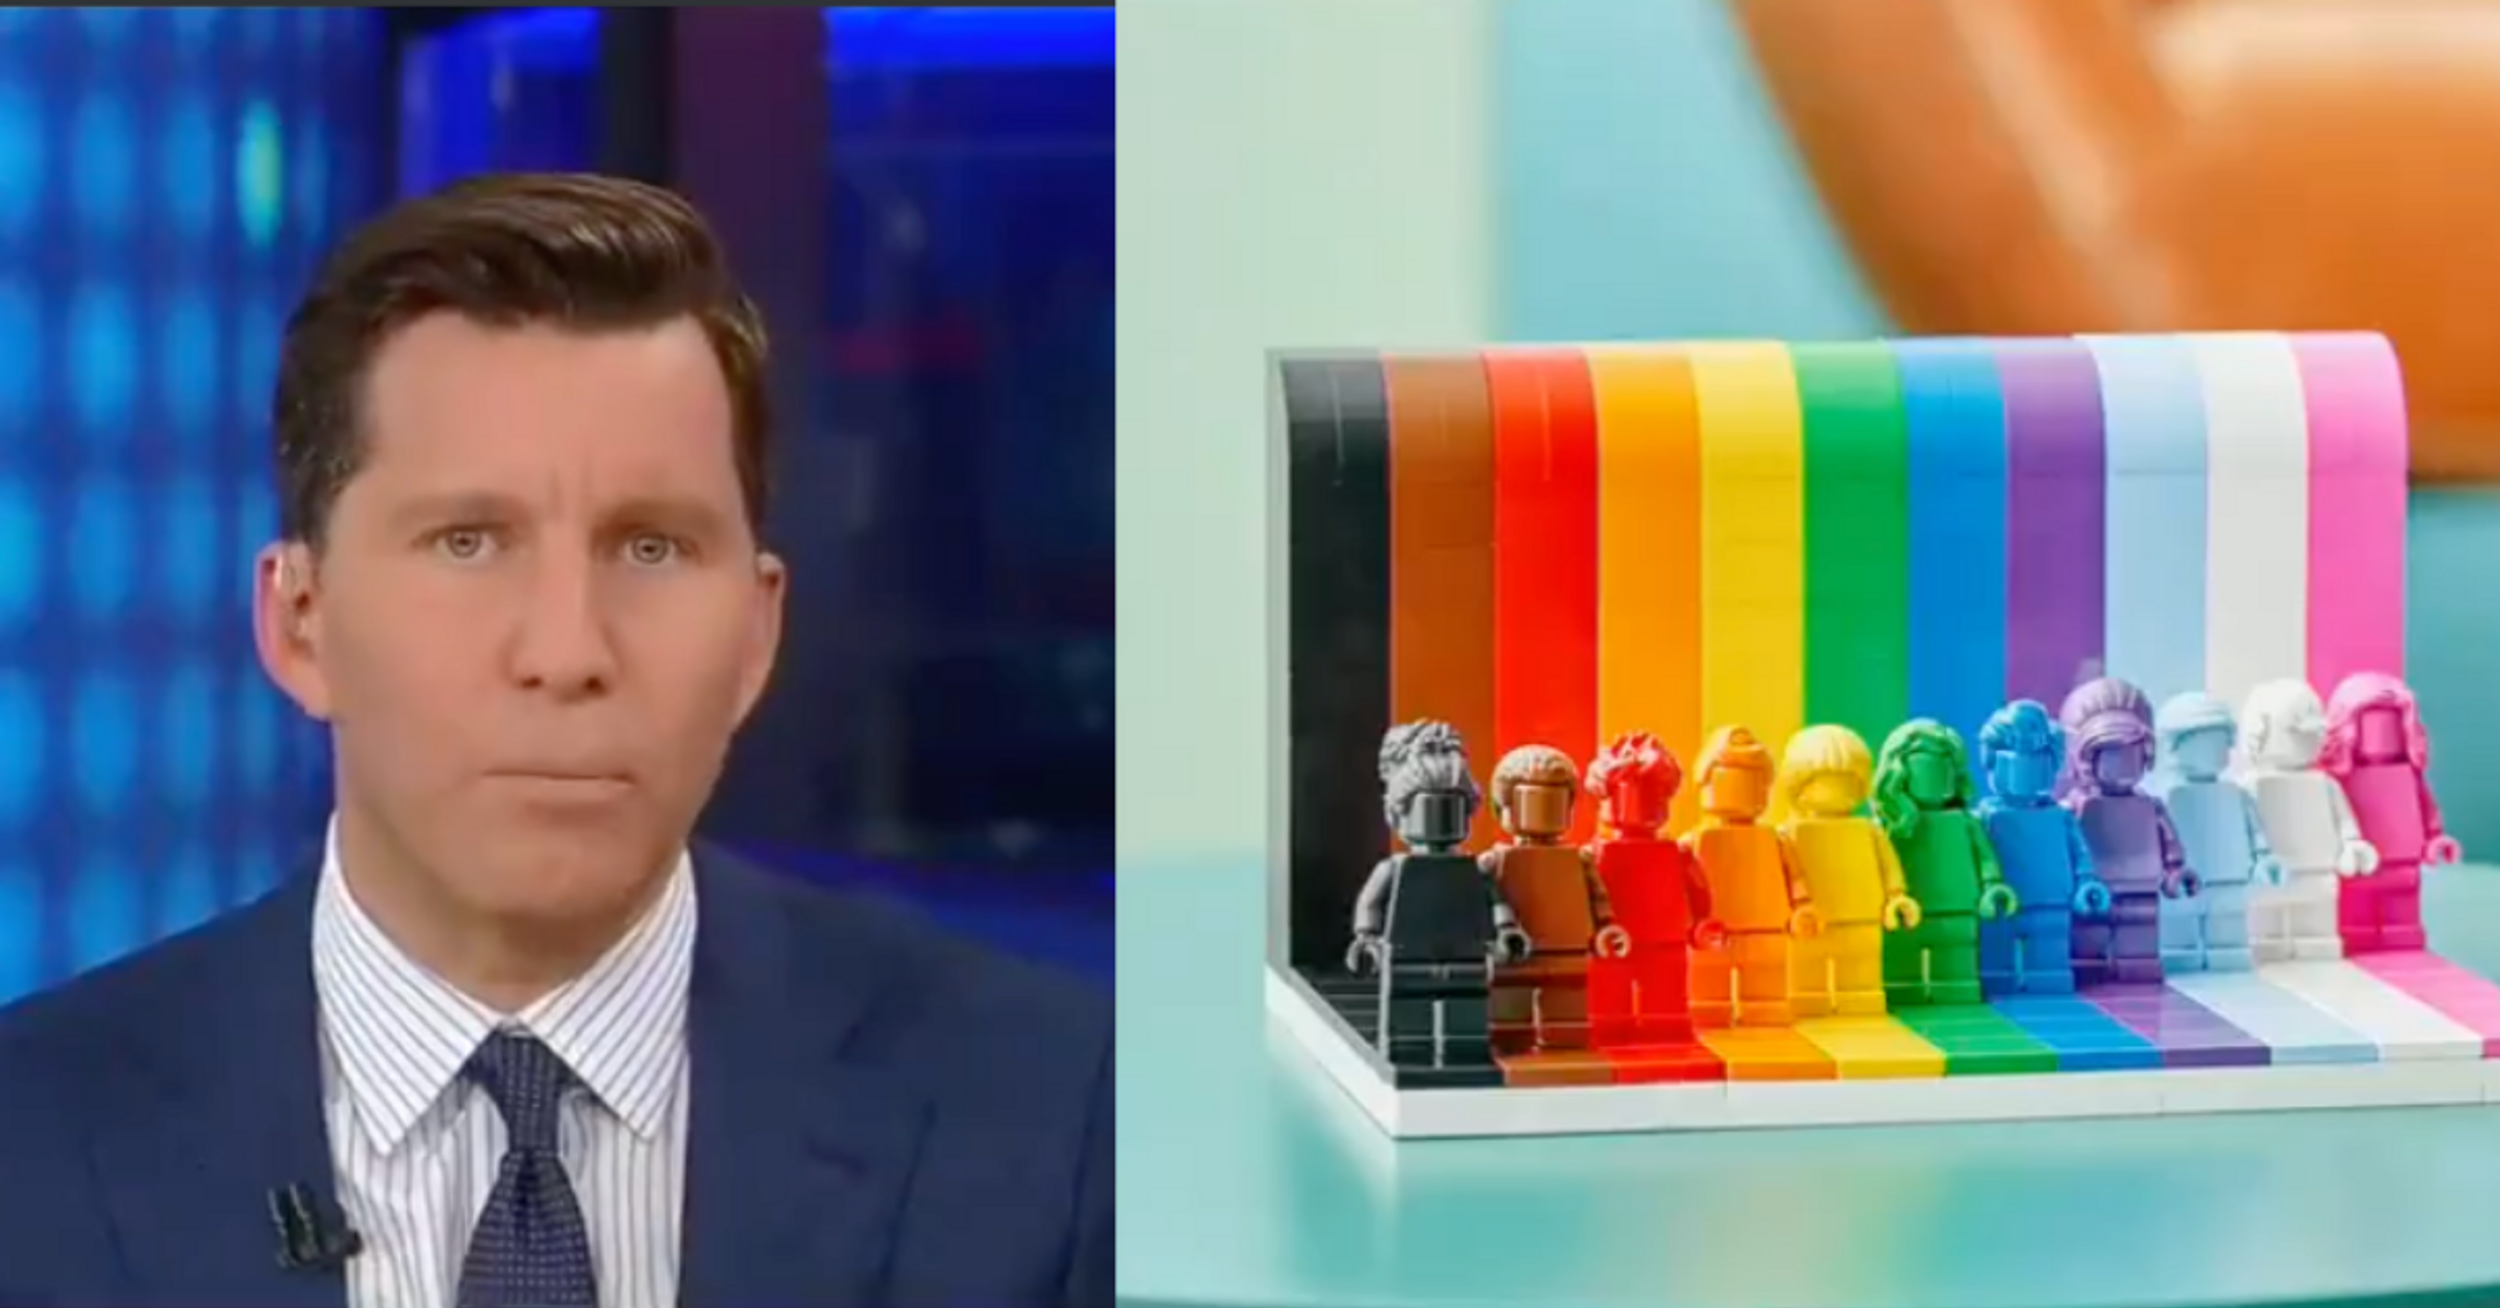 Fox News Host Rants That New LGBTQ Lego Set 'Could Have Been Designed' By KKK Leader